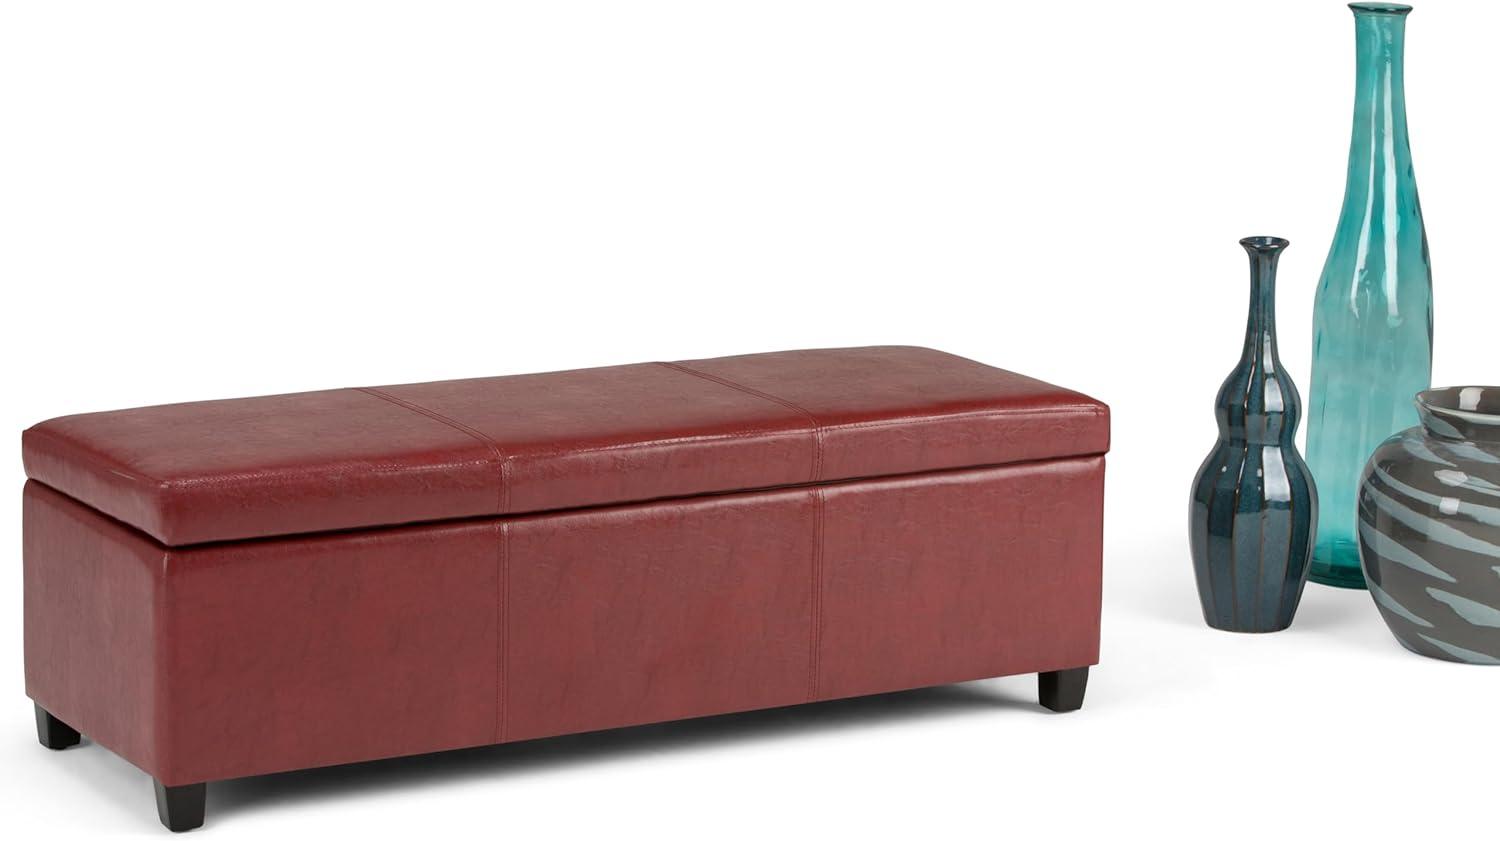 Avalon Red Faux Leather 48" Rectangular Storage Ottoman Bench